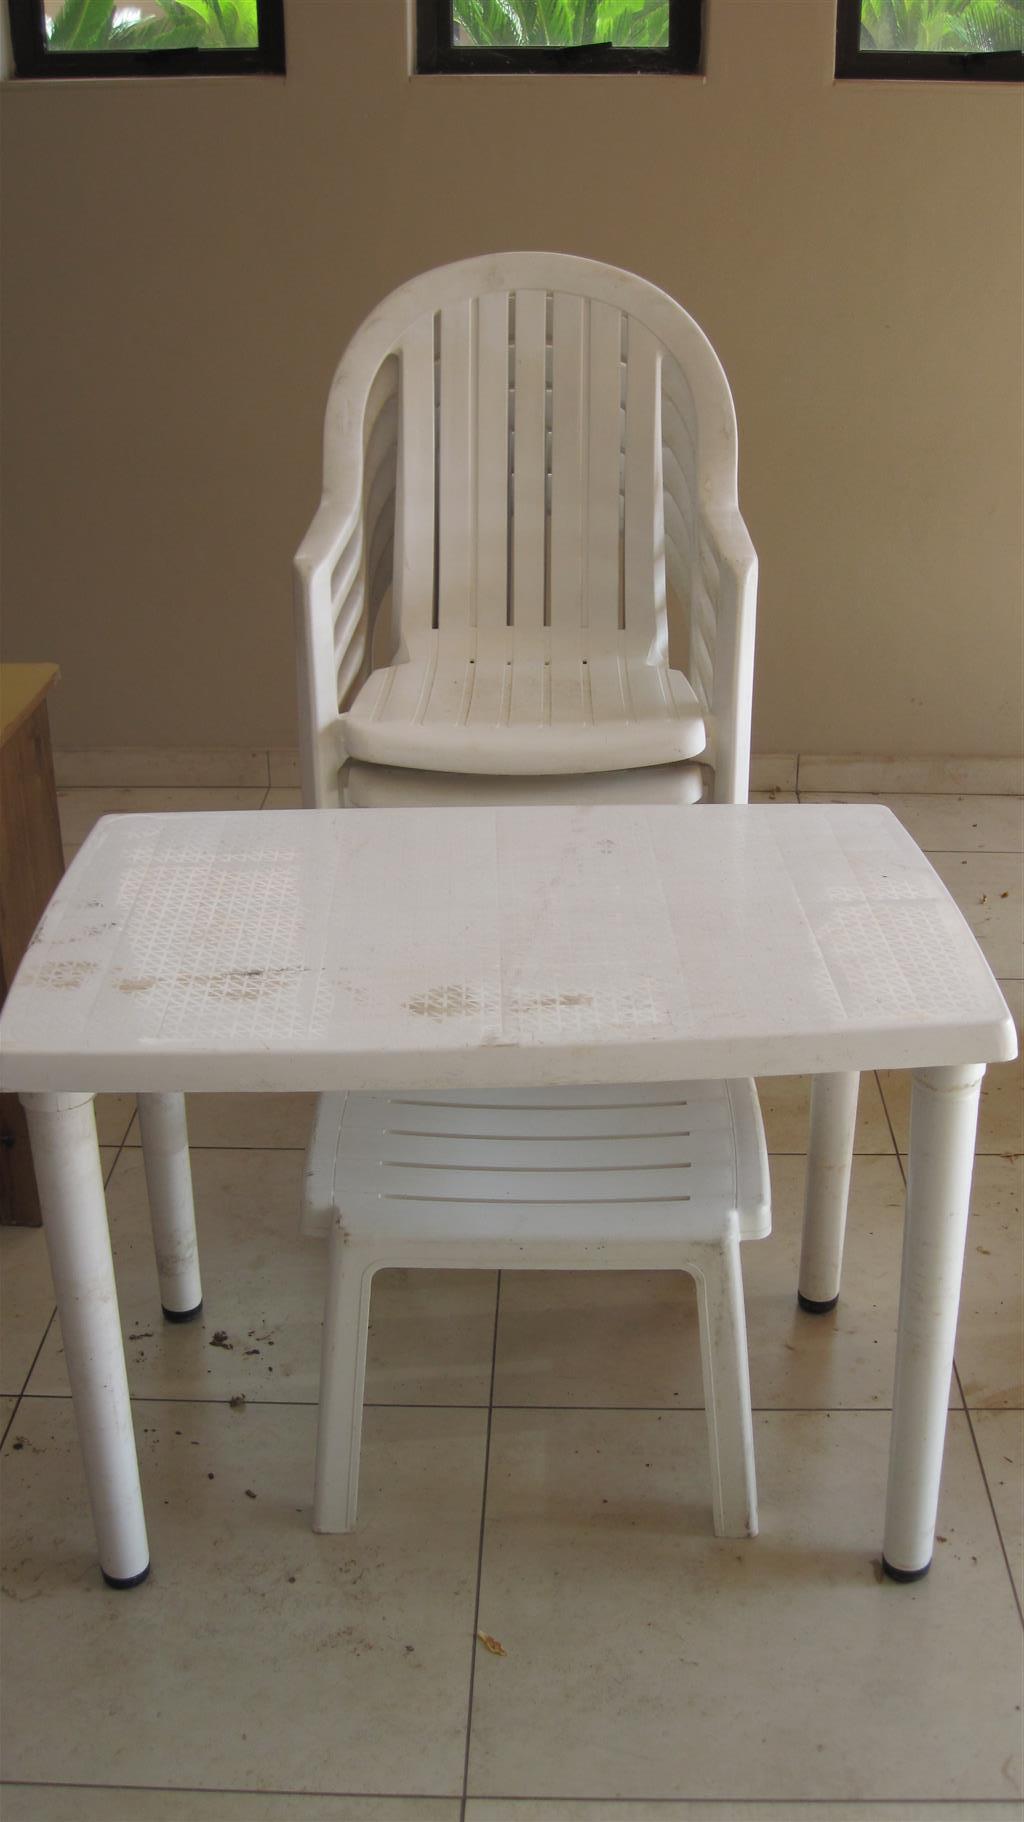 plastic chair and table